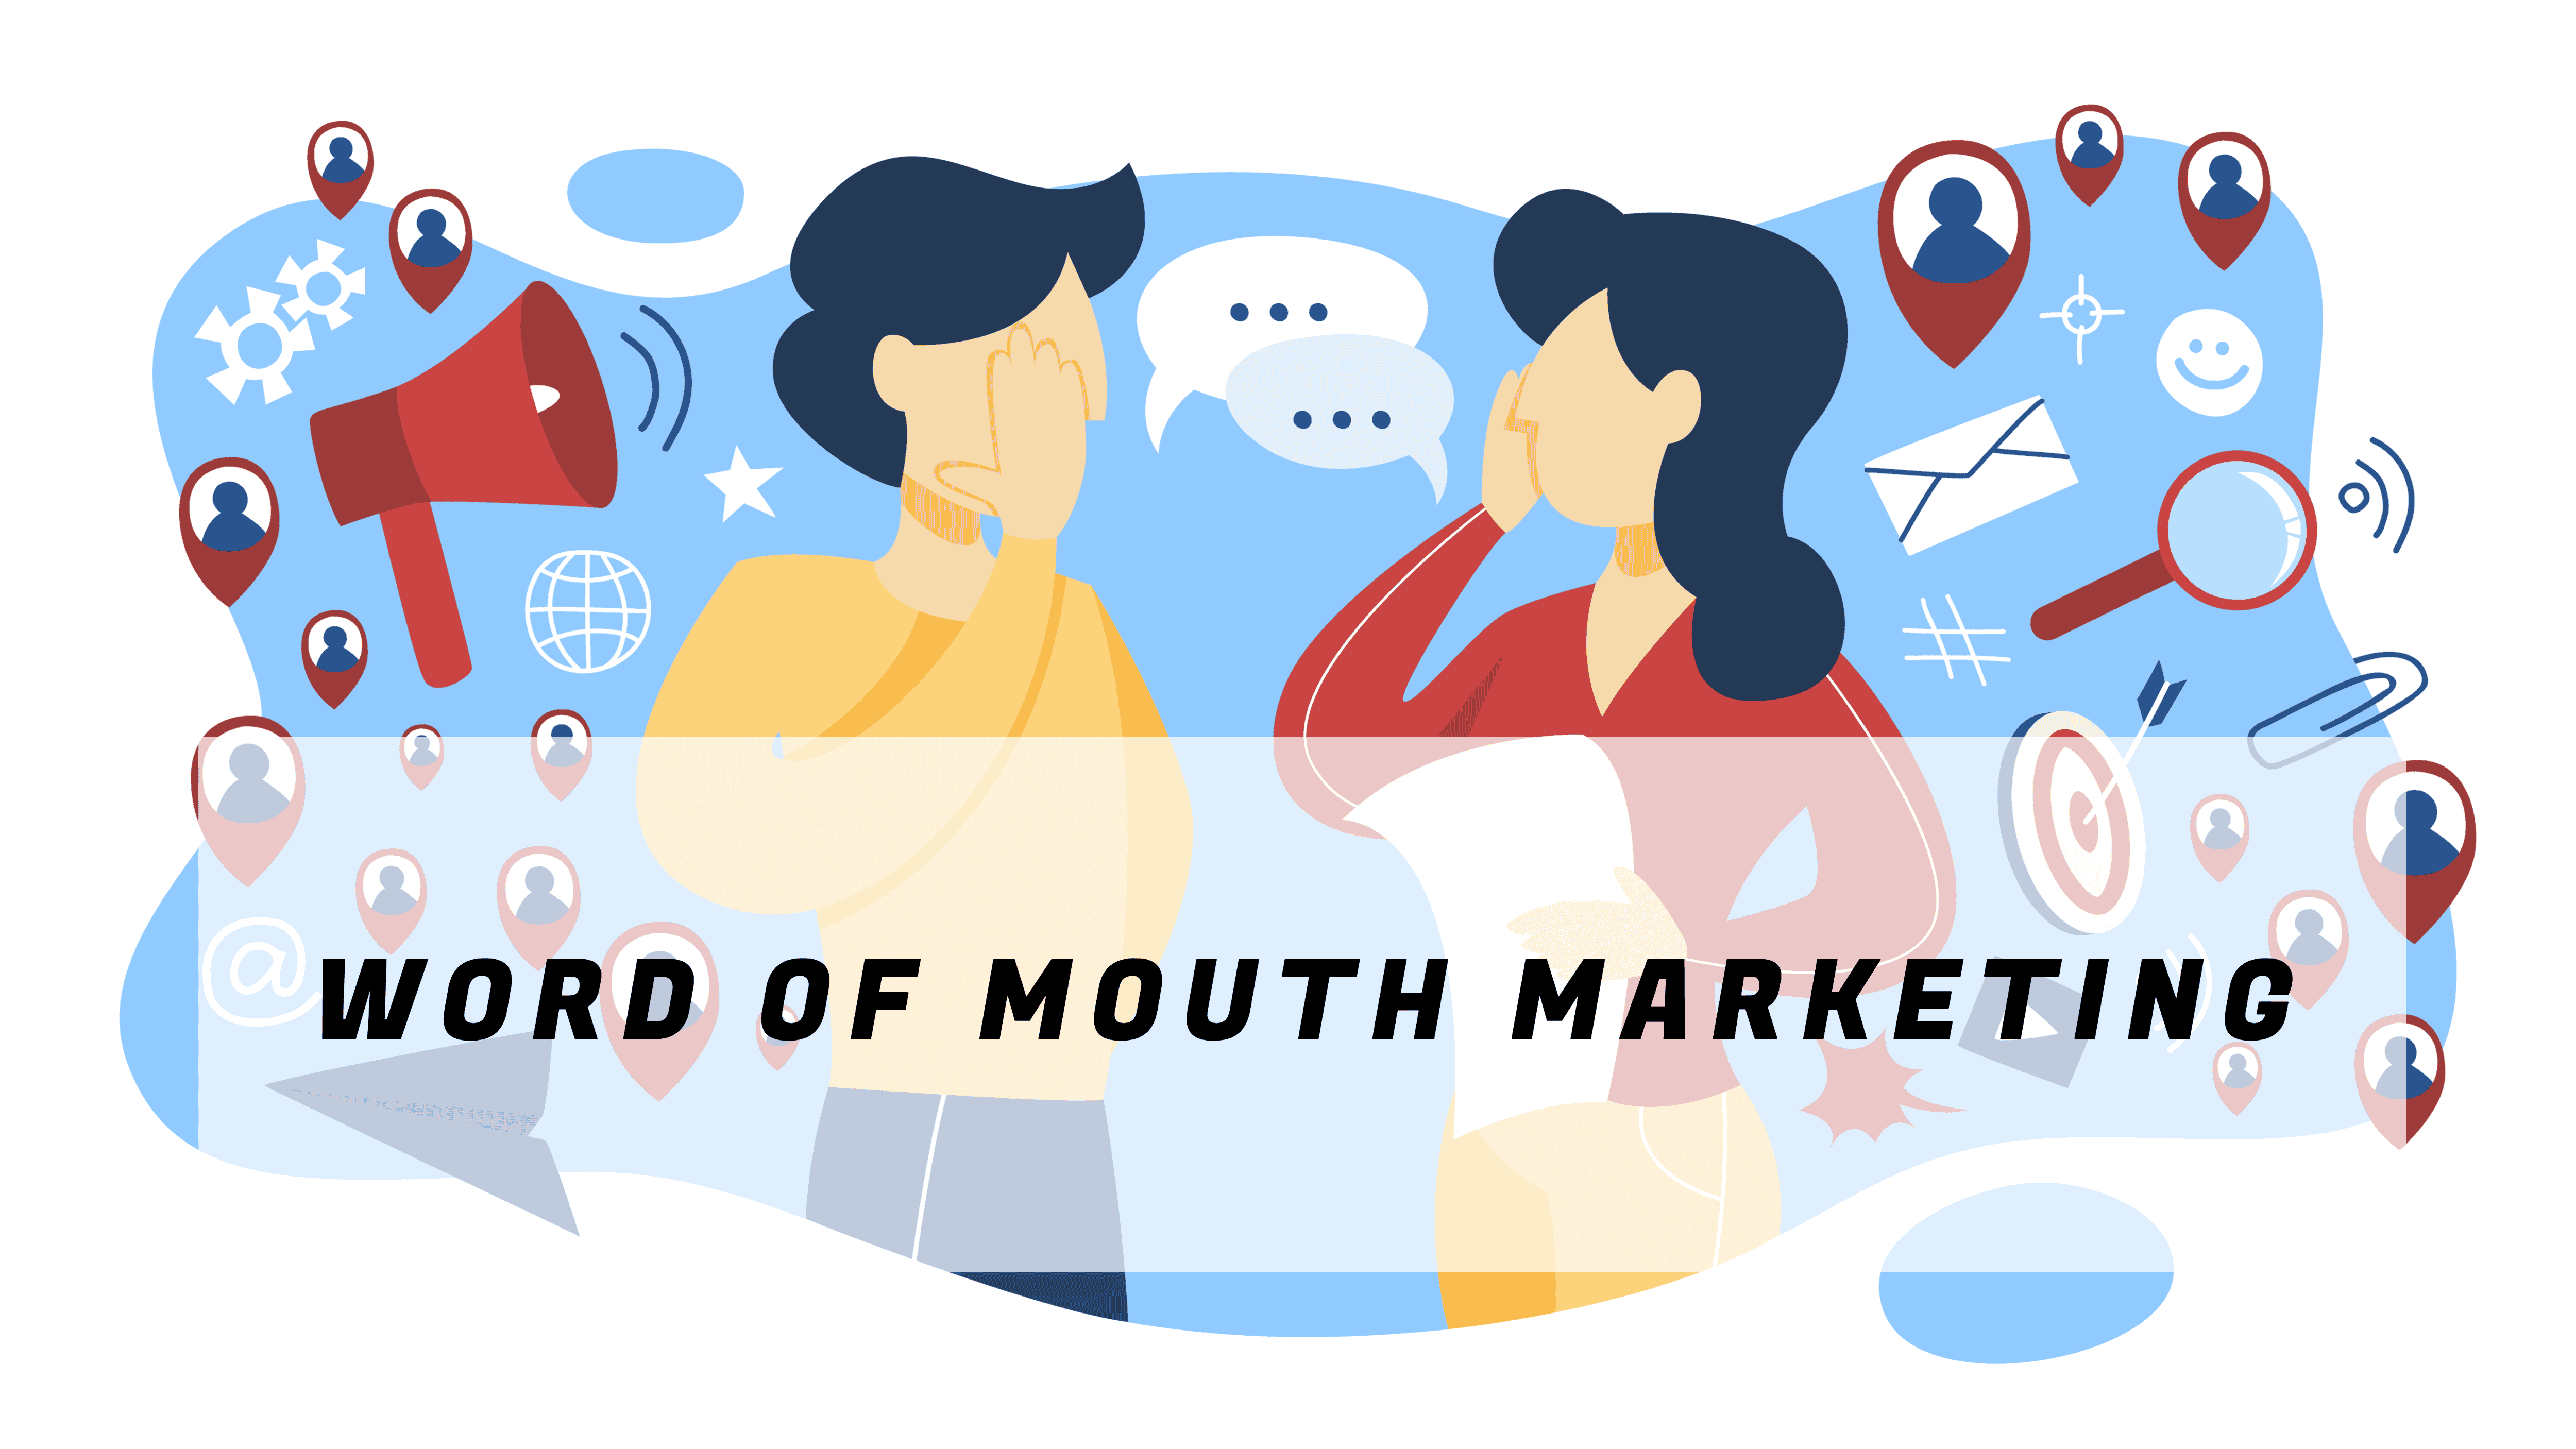 Word of mouth marketing, 口碑行銷